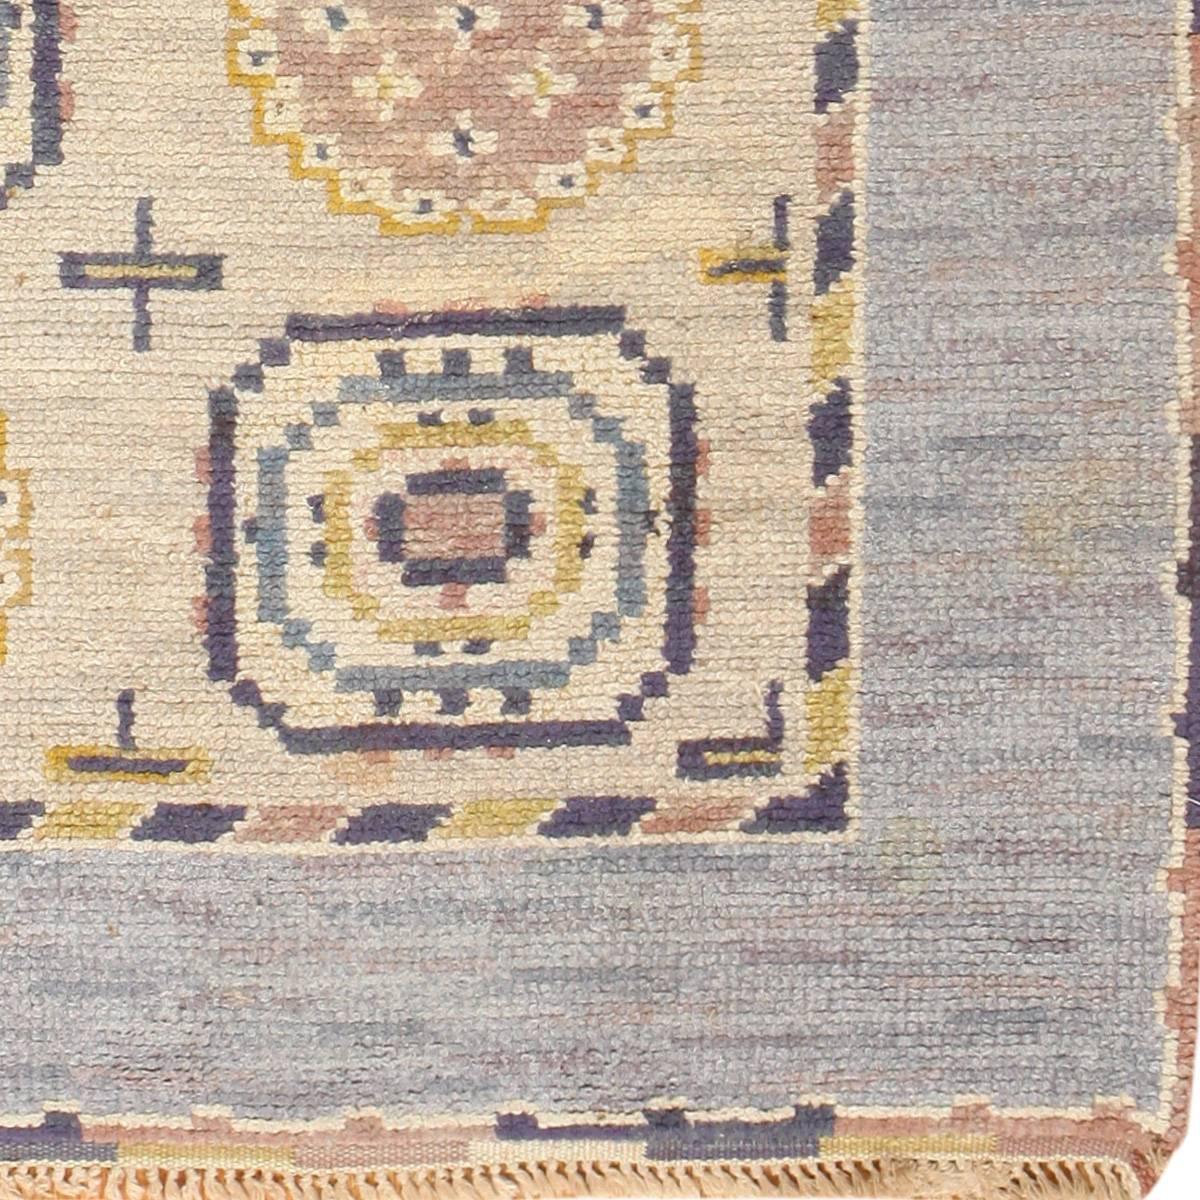 Hand-Knotted Vintage Swedish Pile Rug by Marta Maas-Fjetterström